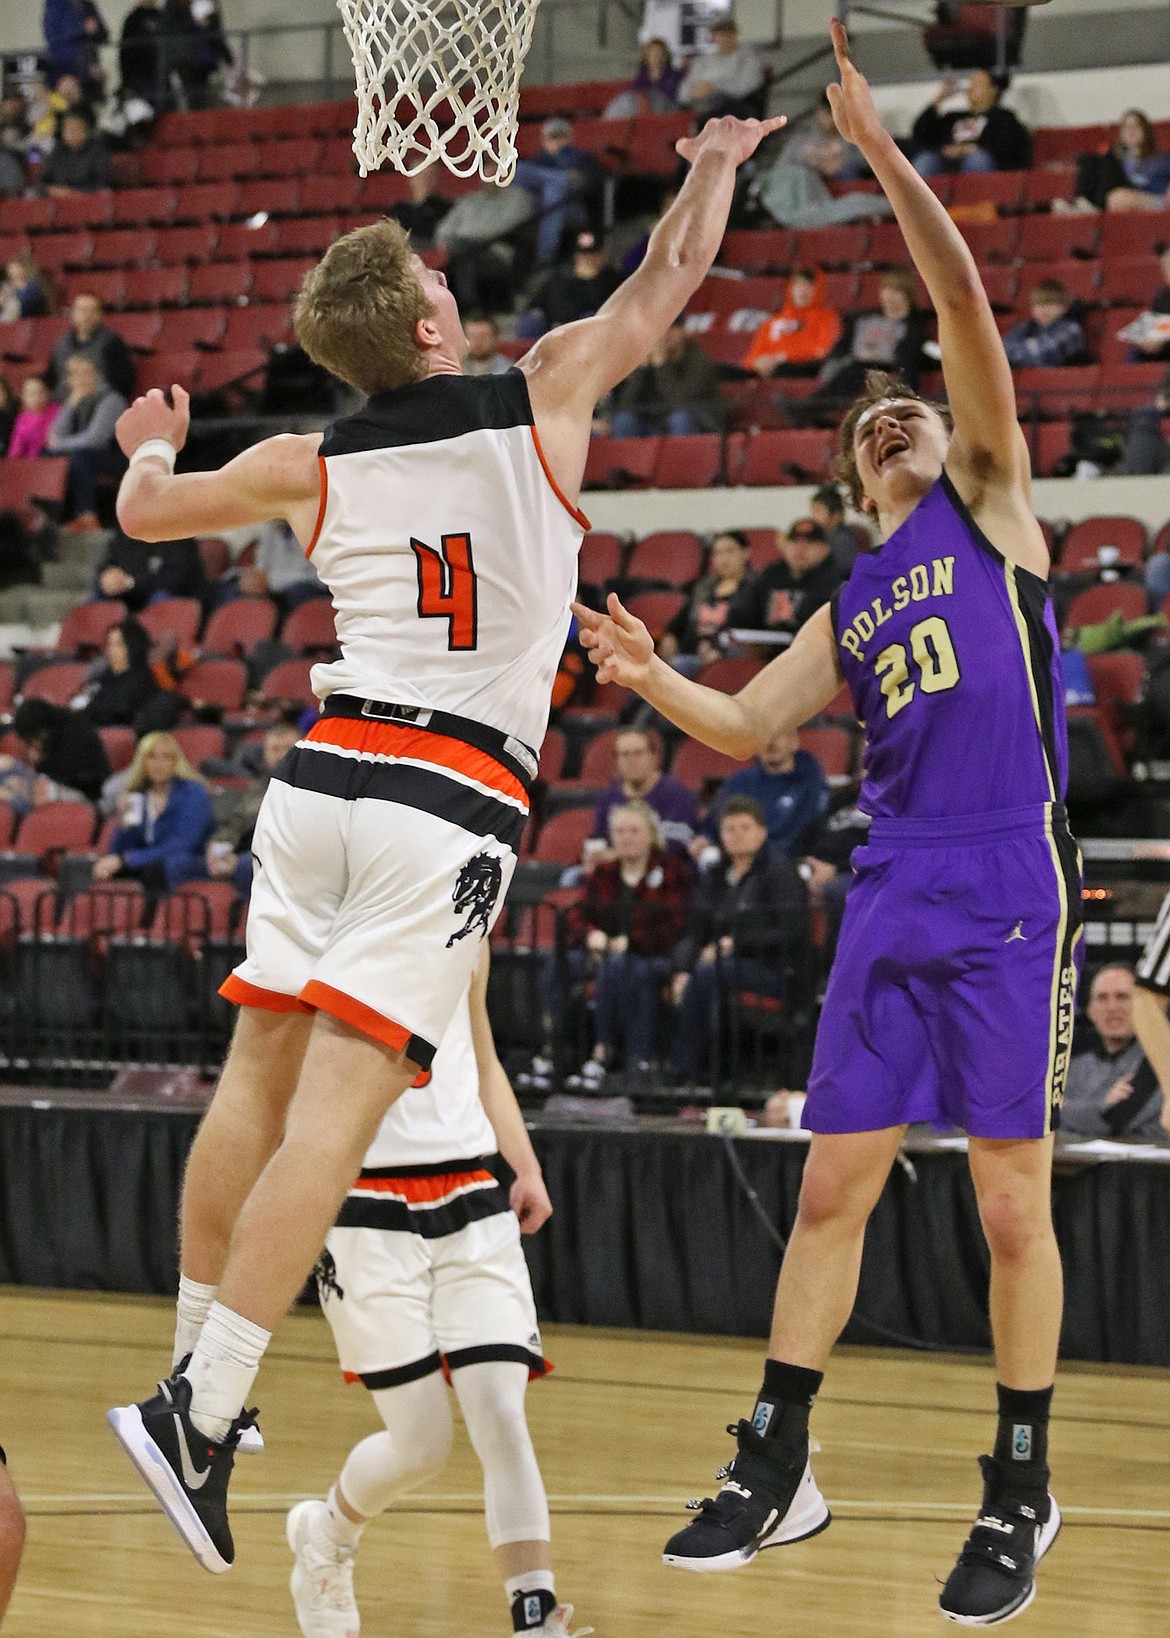 Polson freshman Jarrett Wilson lays in 2 of his 6 points against Frenchtown Friday afternoon at the State A tourney in Billings. (Bob Gunderson photo)